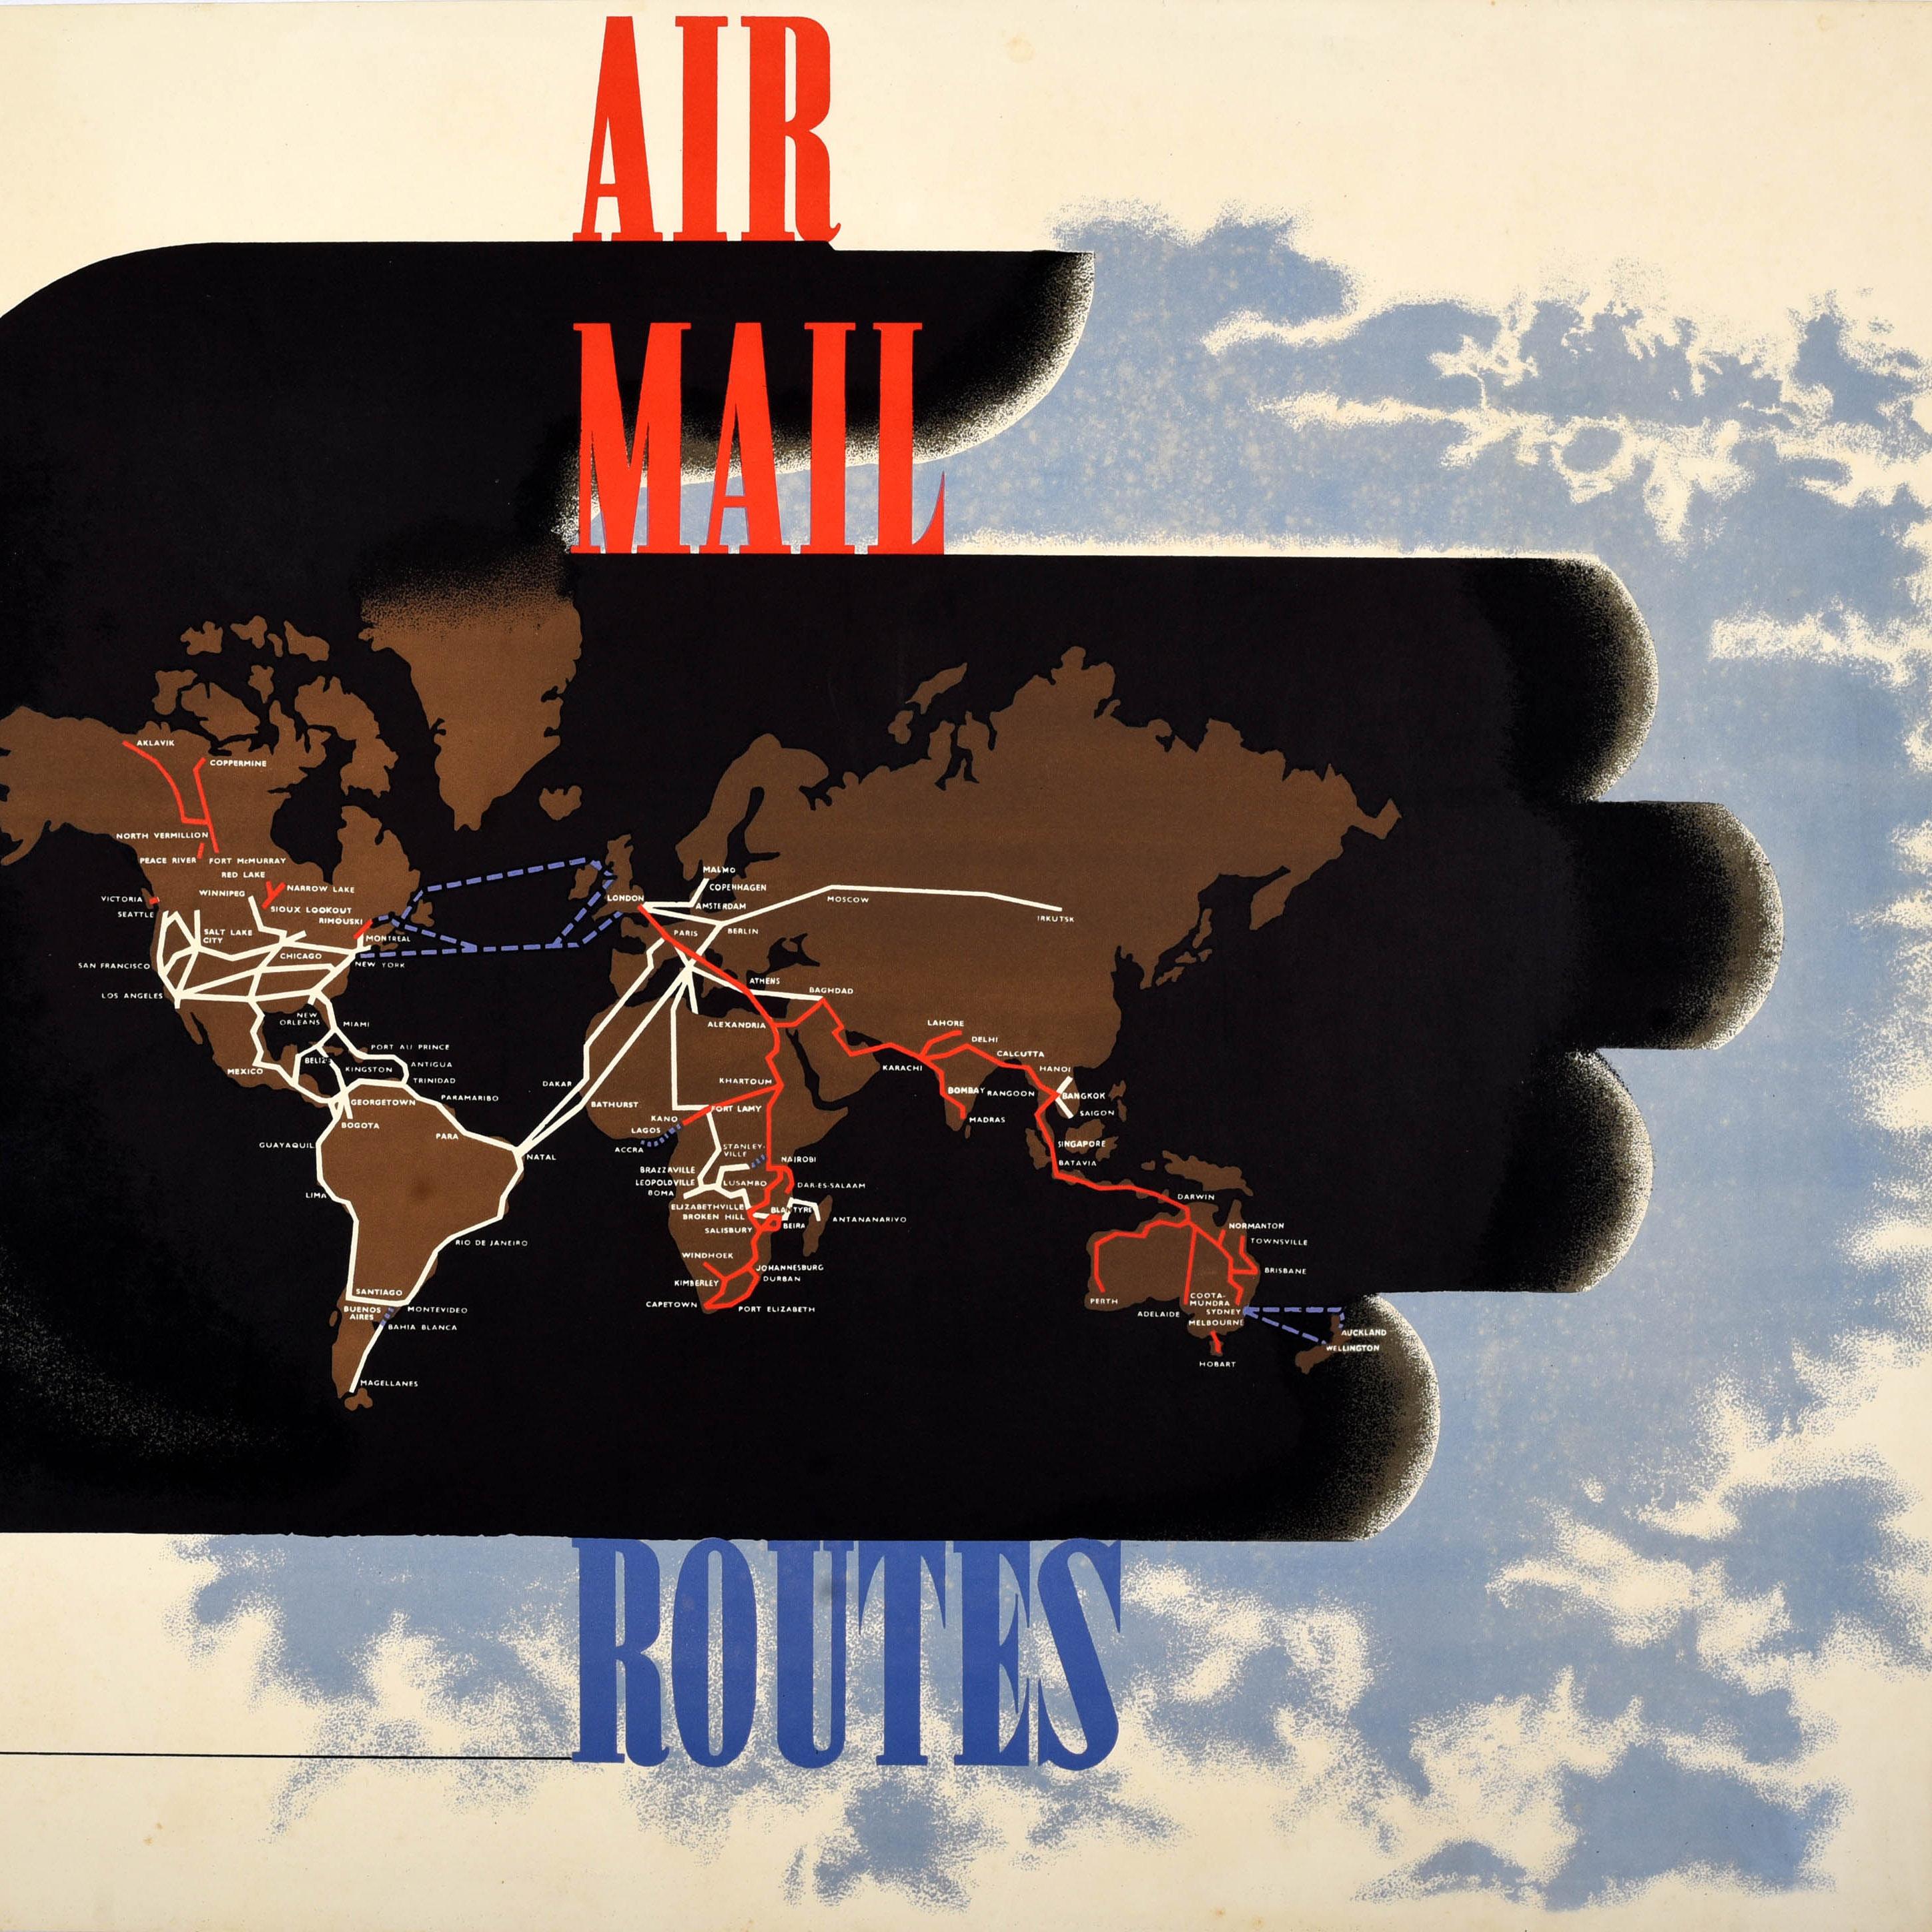 Rare Original Vintage Advertising Poster Air Mail Routes GPO Mcknight Kauffer In Good Condition For Sale In London, GB